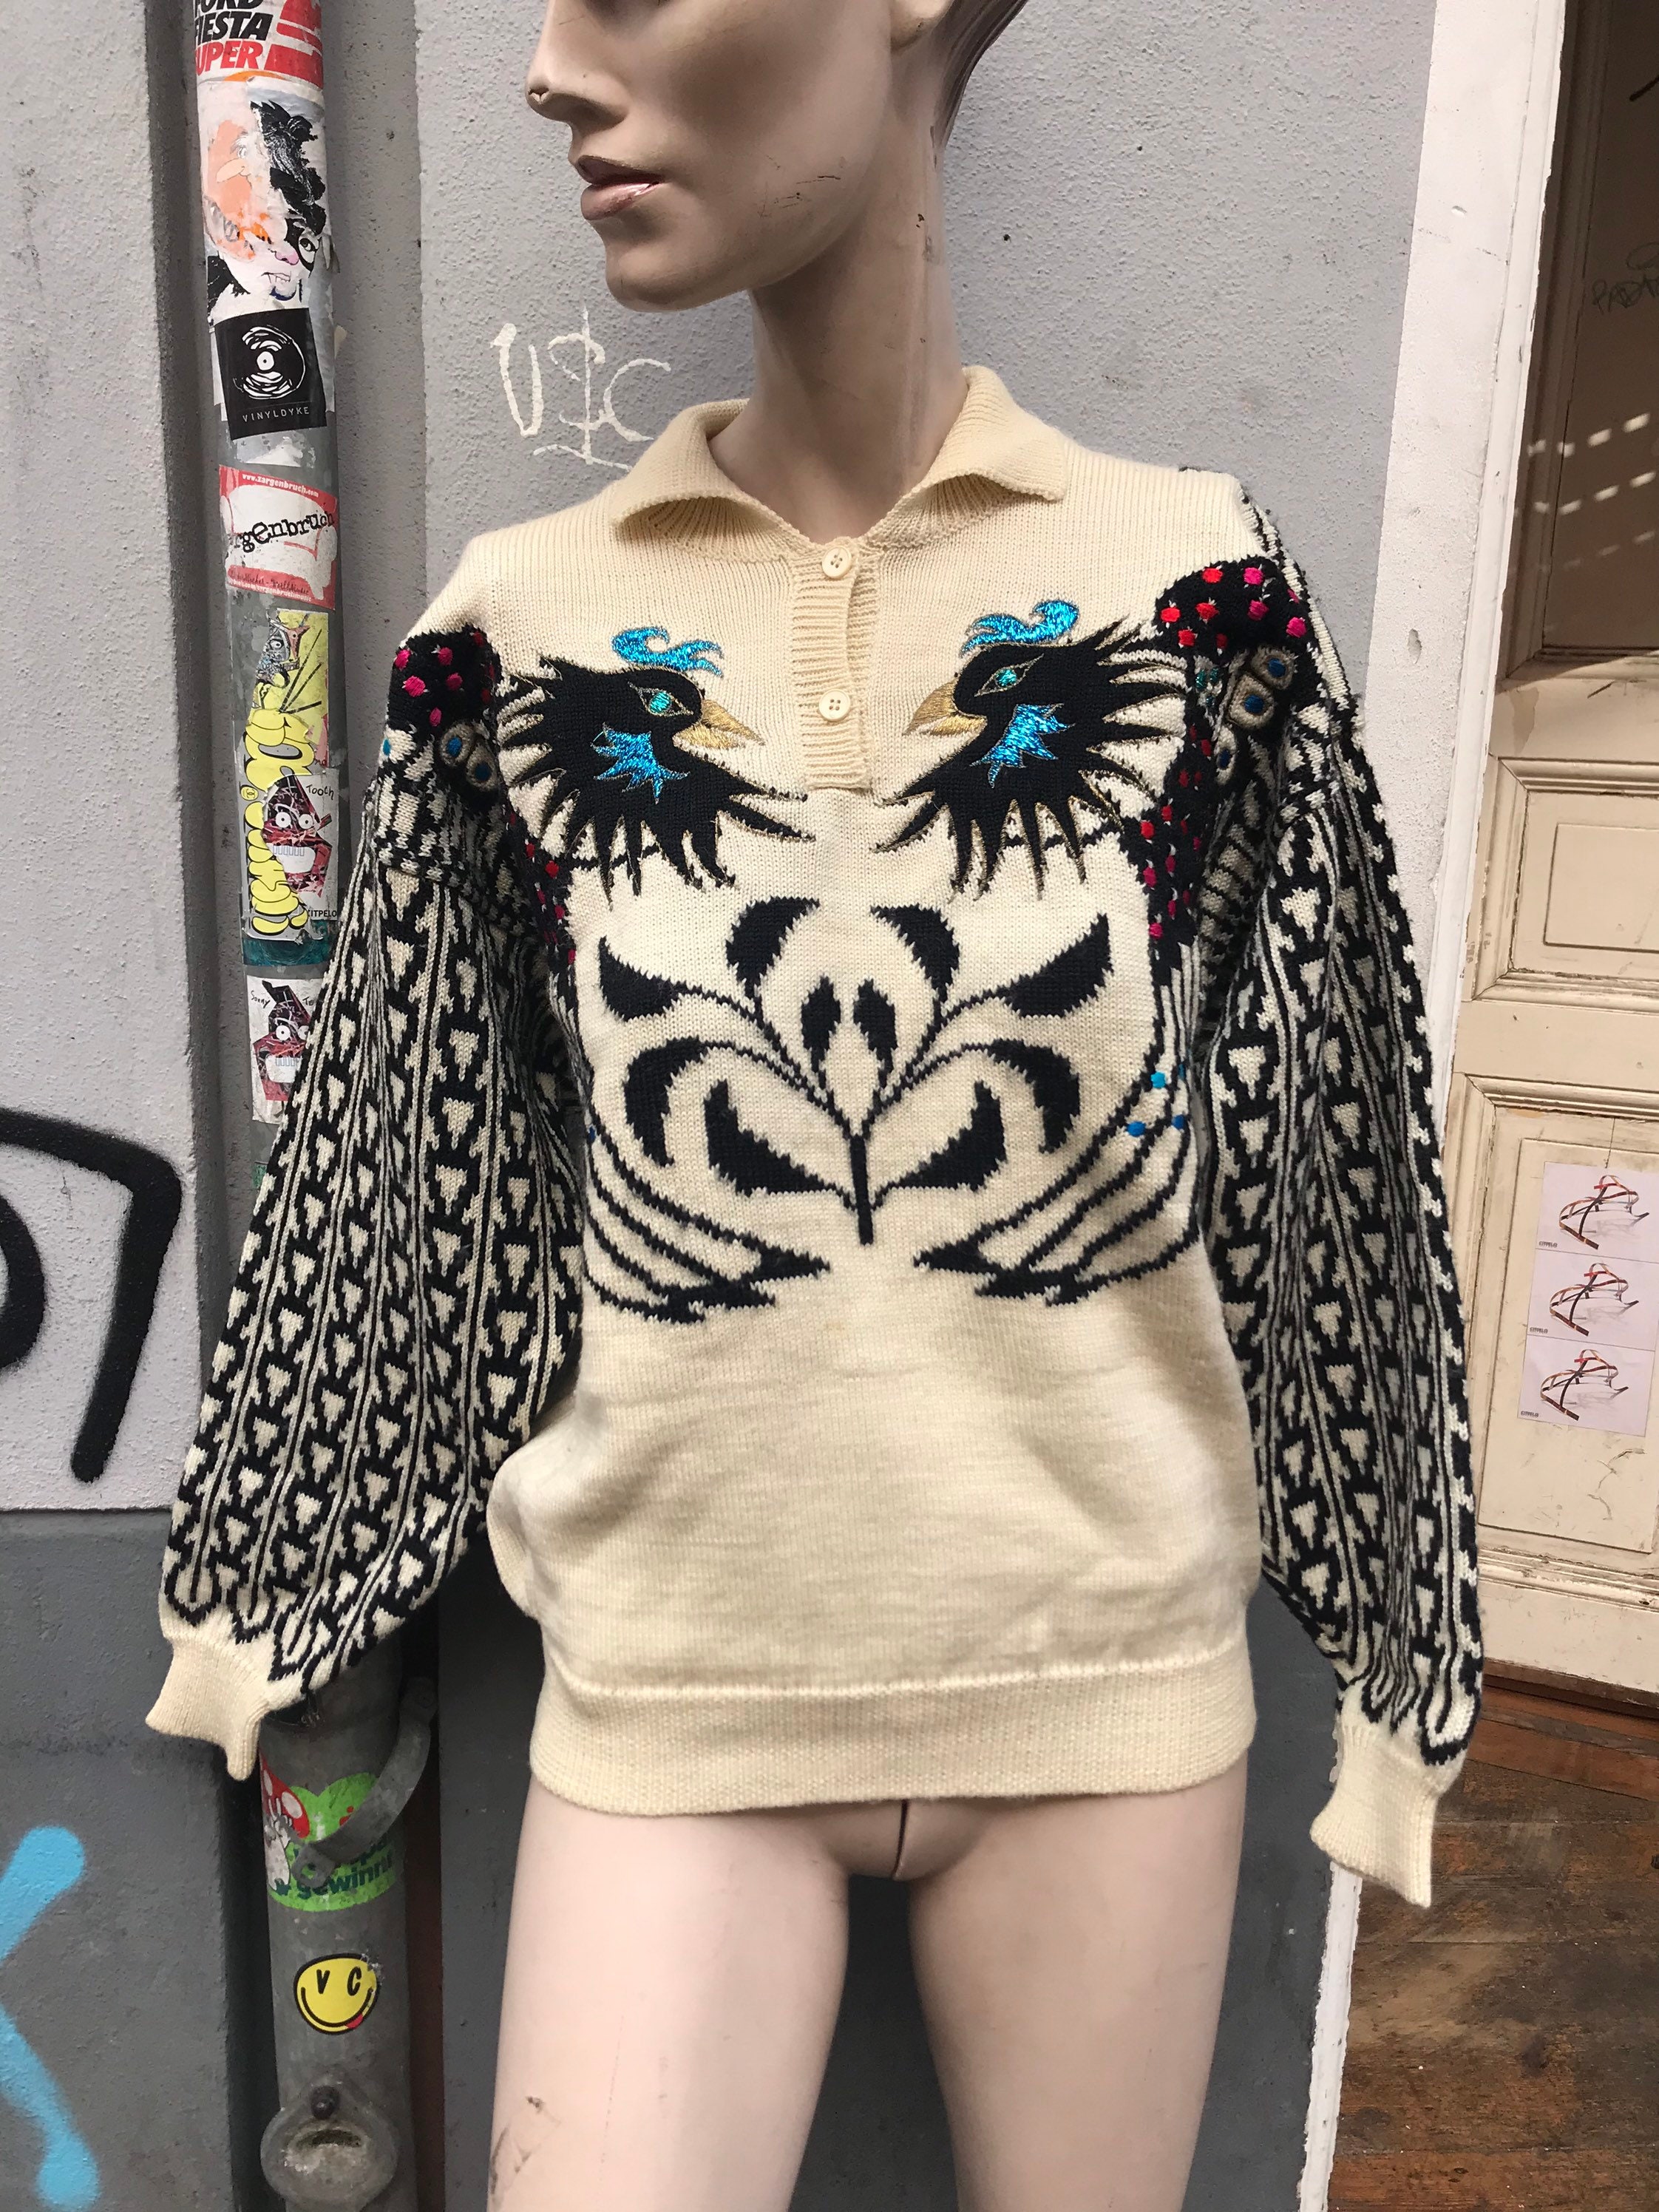 Early 80s Vintage Graphic Unisex Kansai Yamamoto Knit Sweater with Zippers